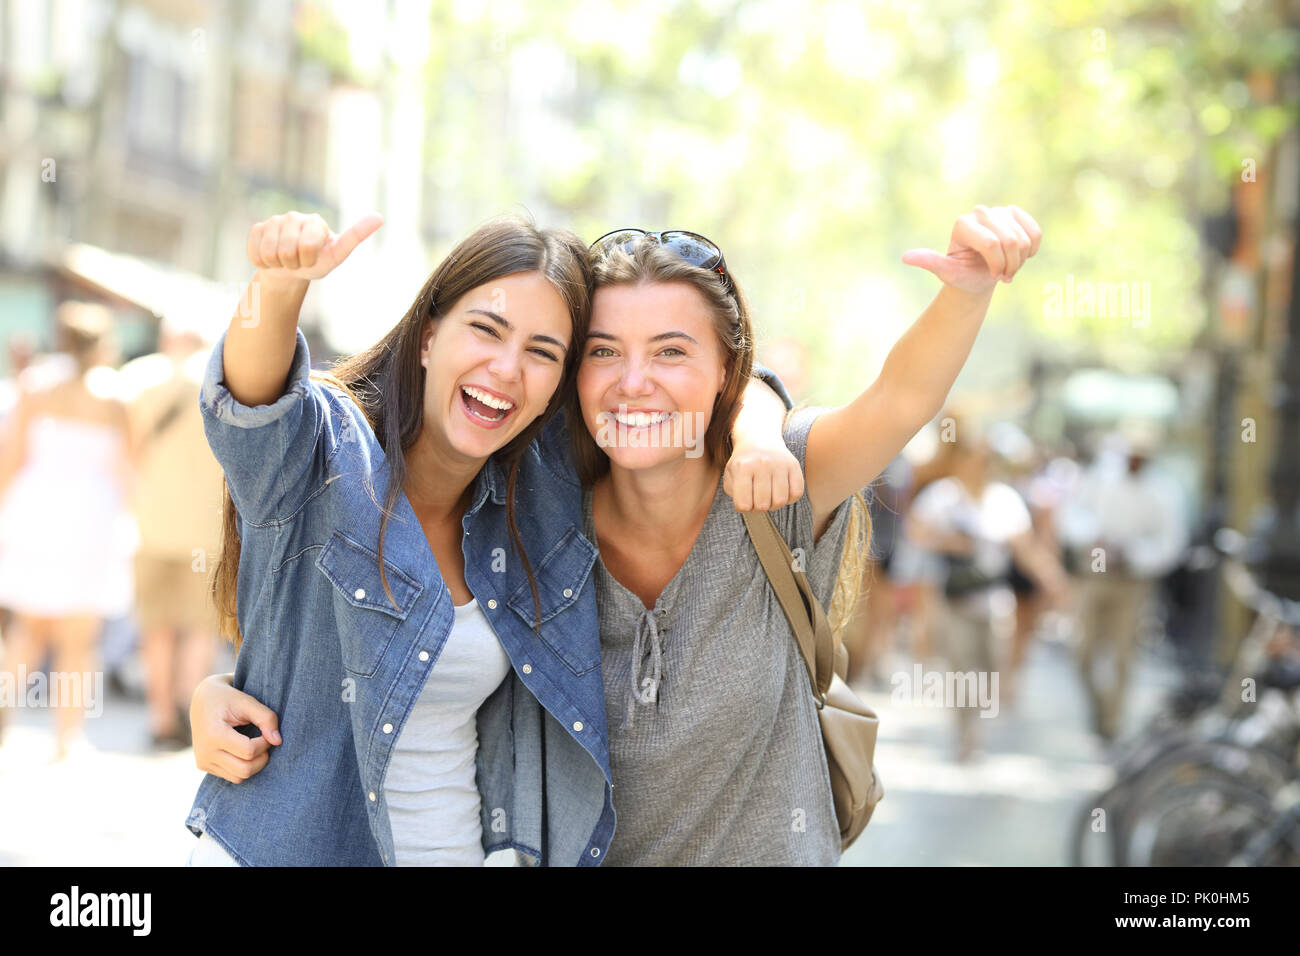 Front view portrait of two cheerful friends laughing loud looking at camera with thumbs up Stock Photo